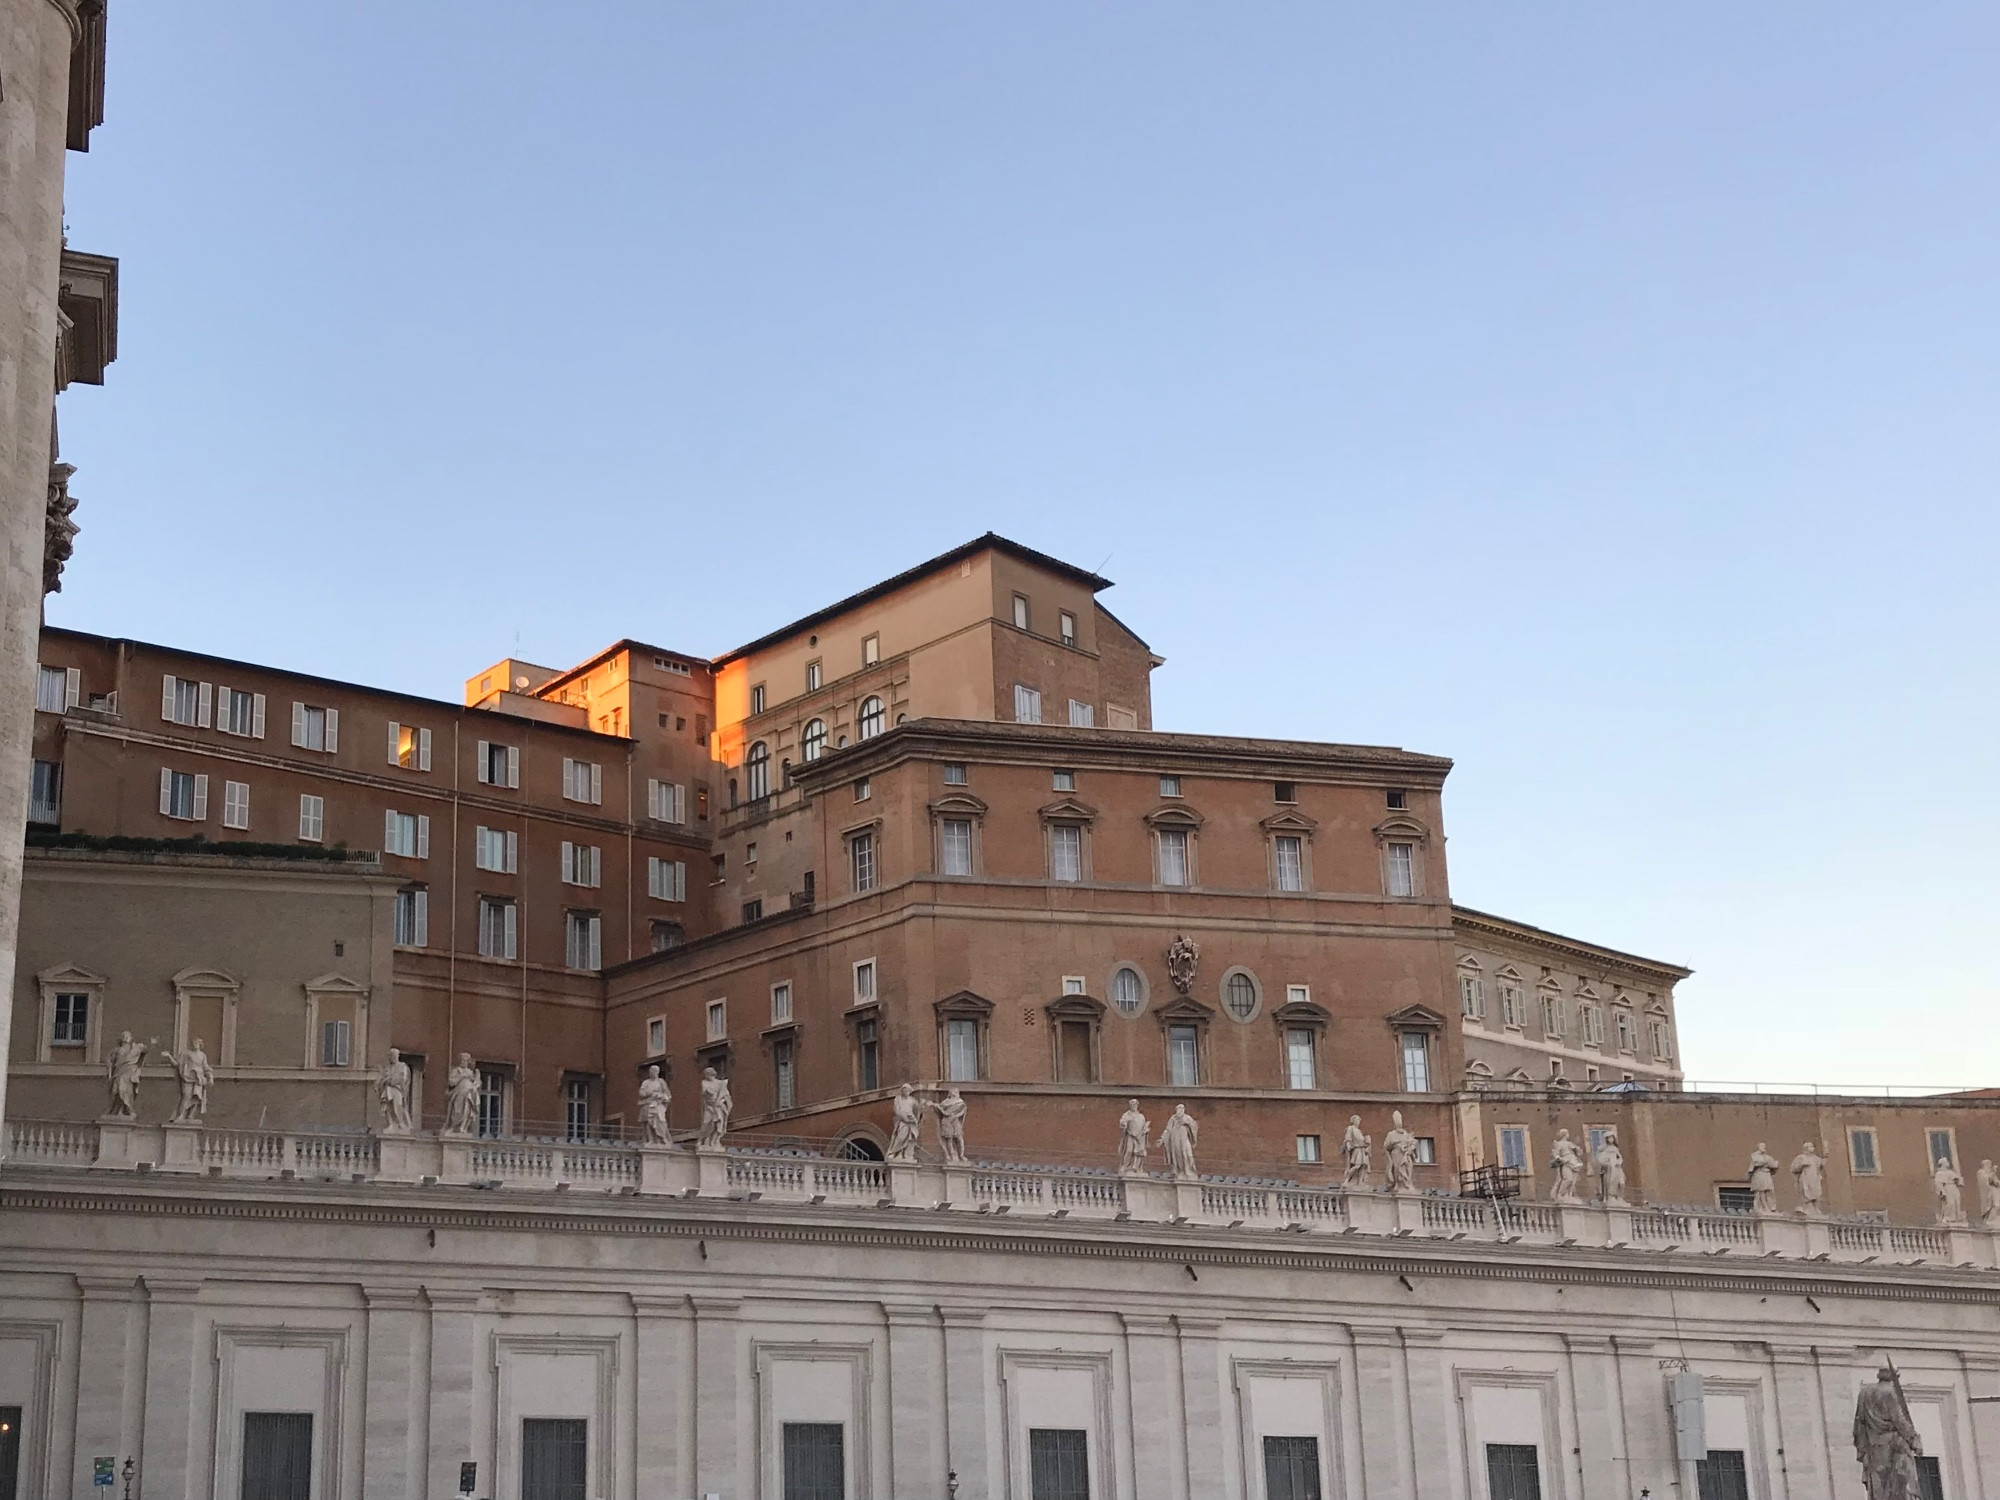 Pope's apartments